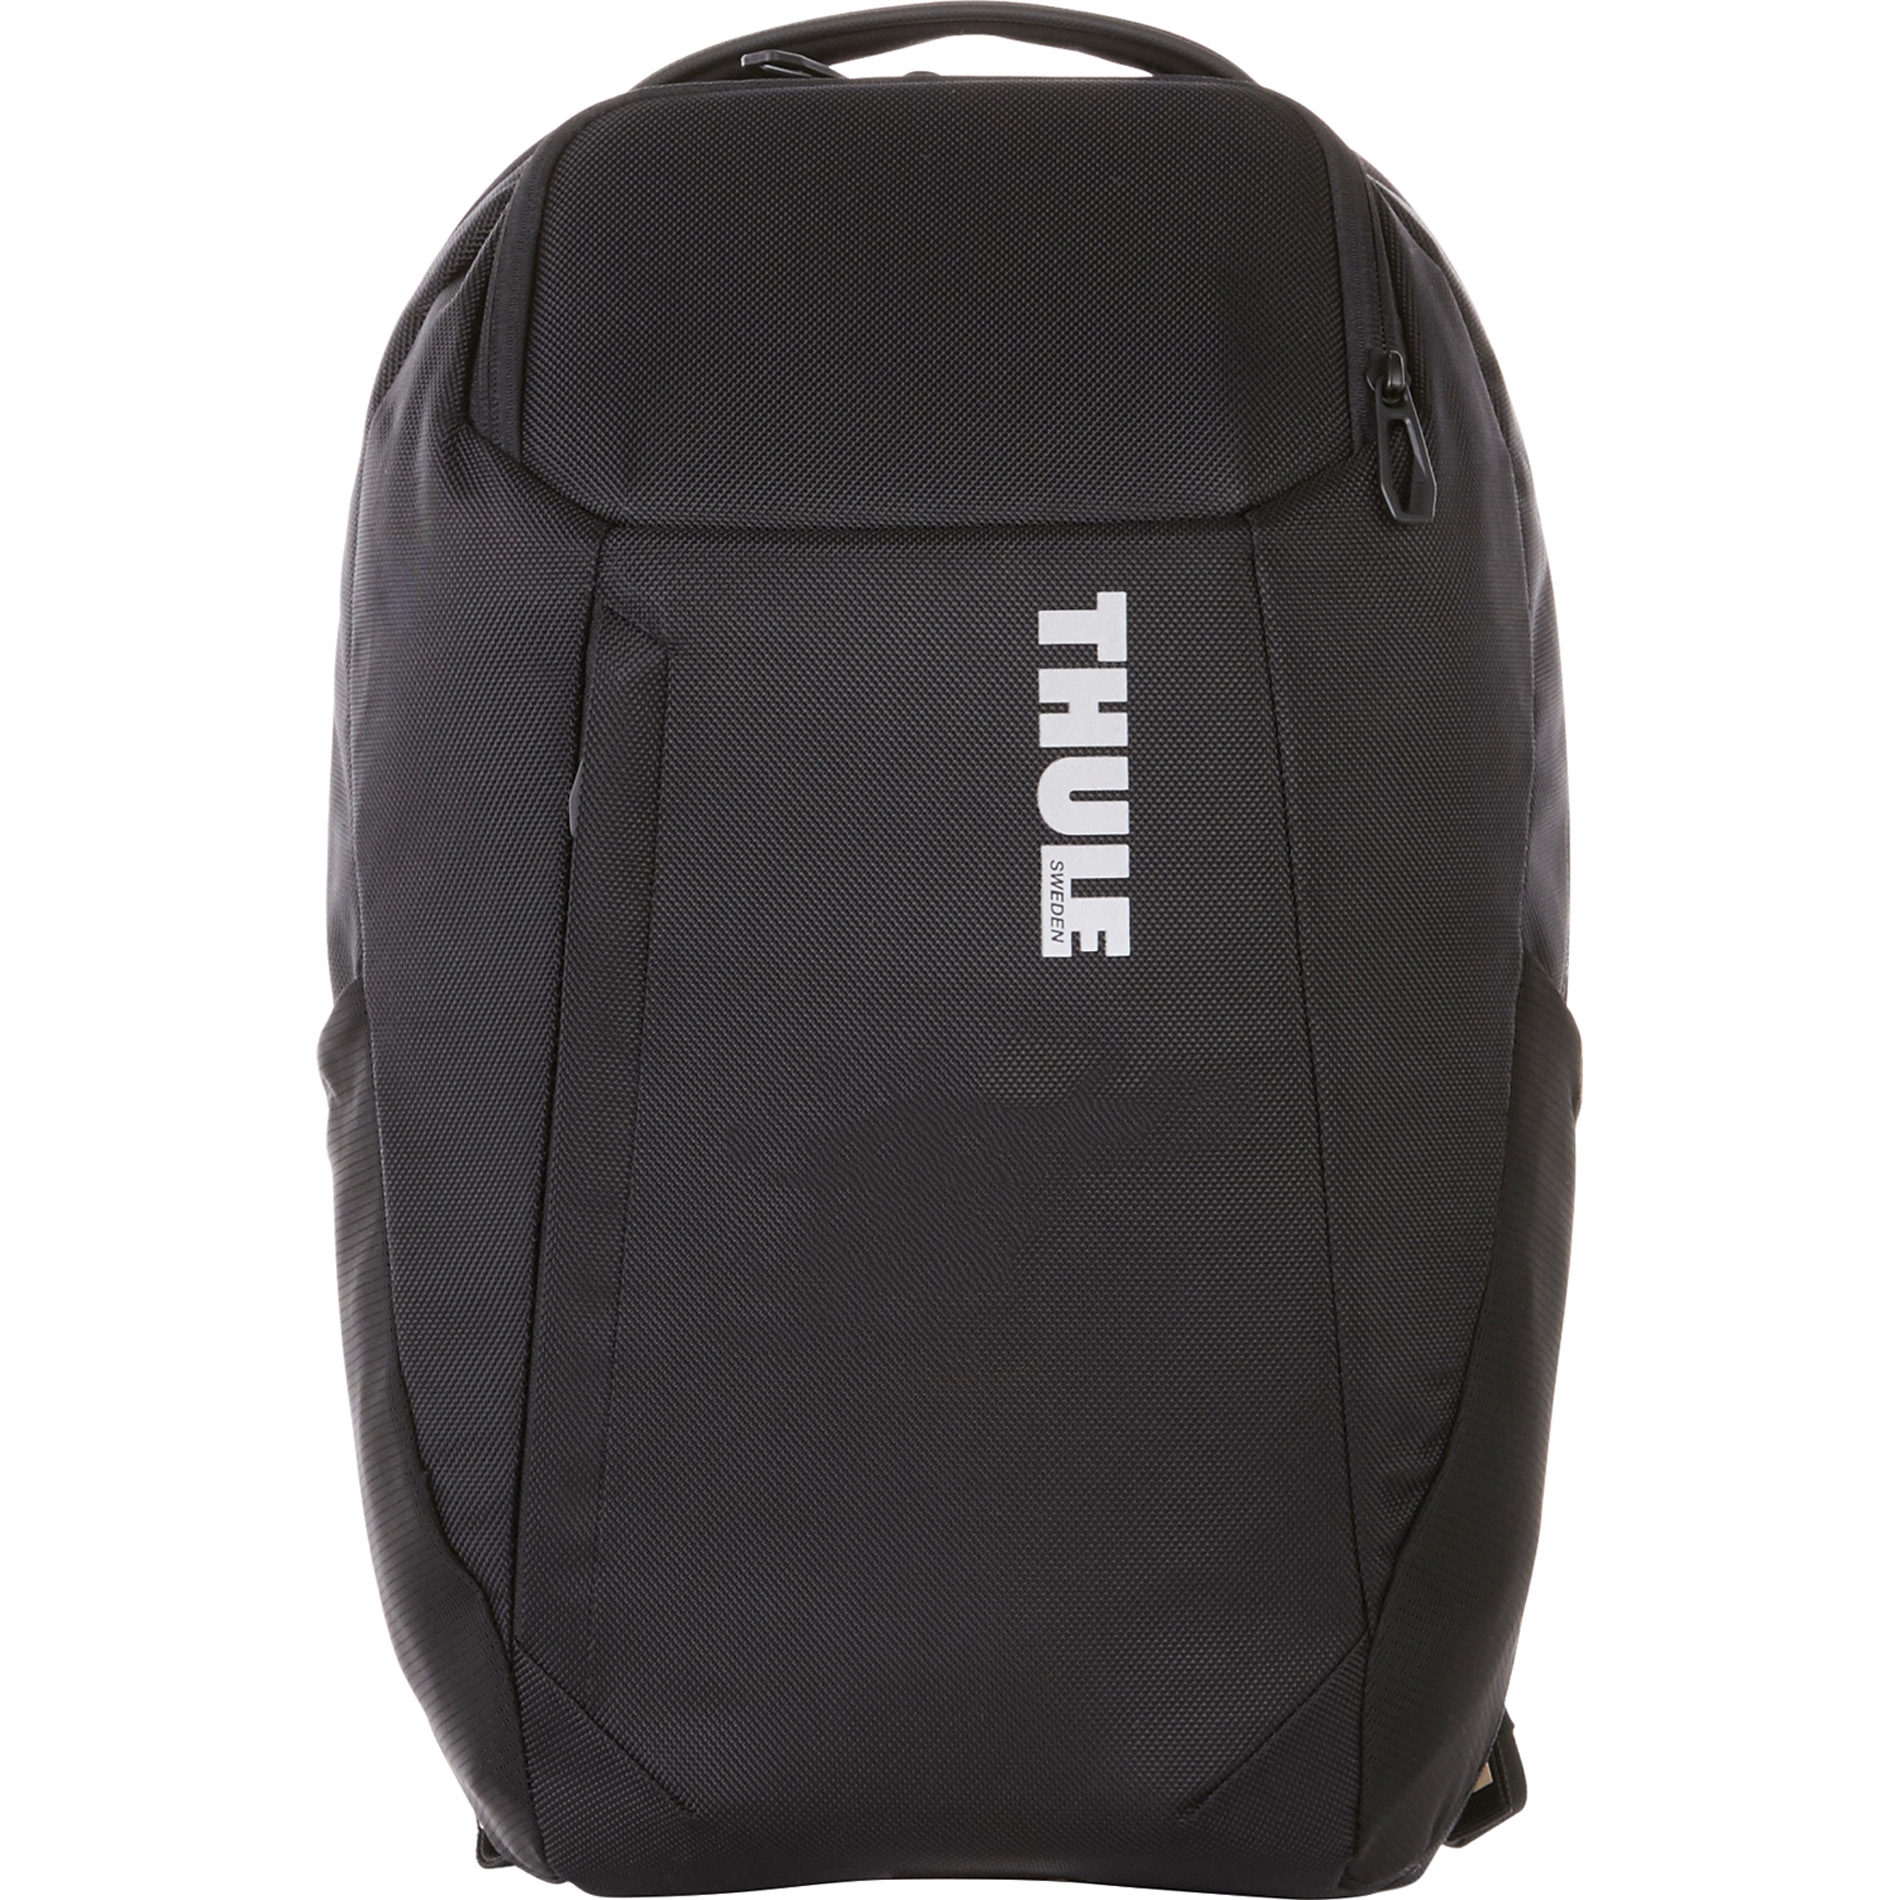 Thule 9020-19 - Accent 15" Backpack $84.59 - Bags